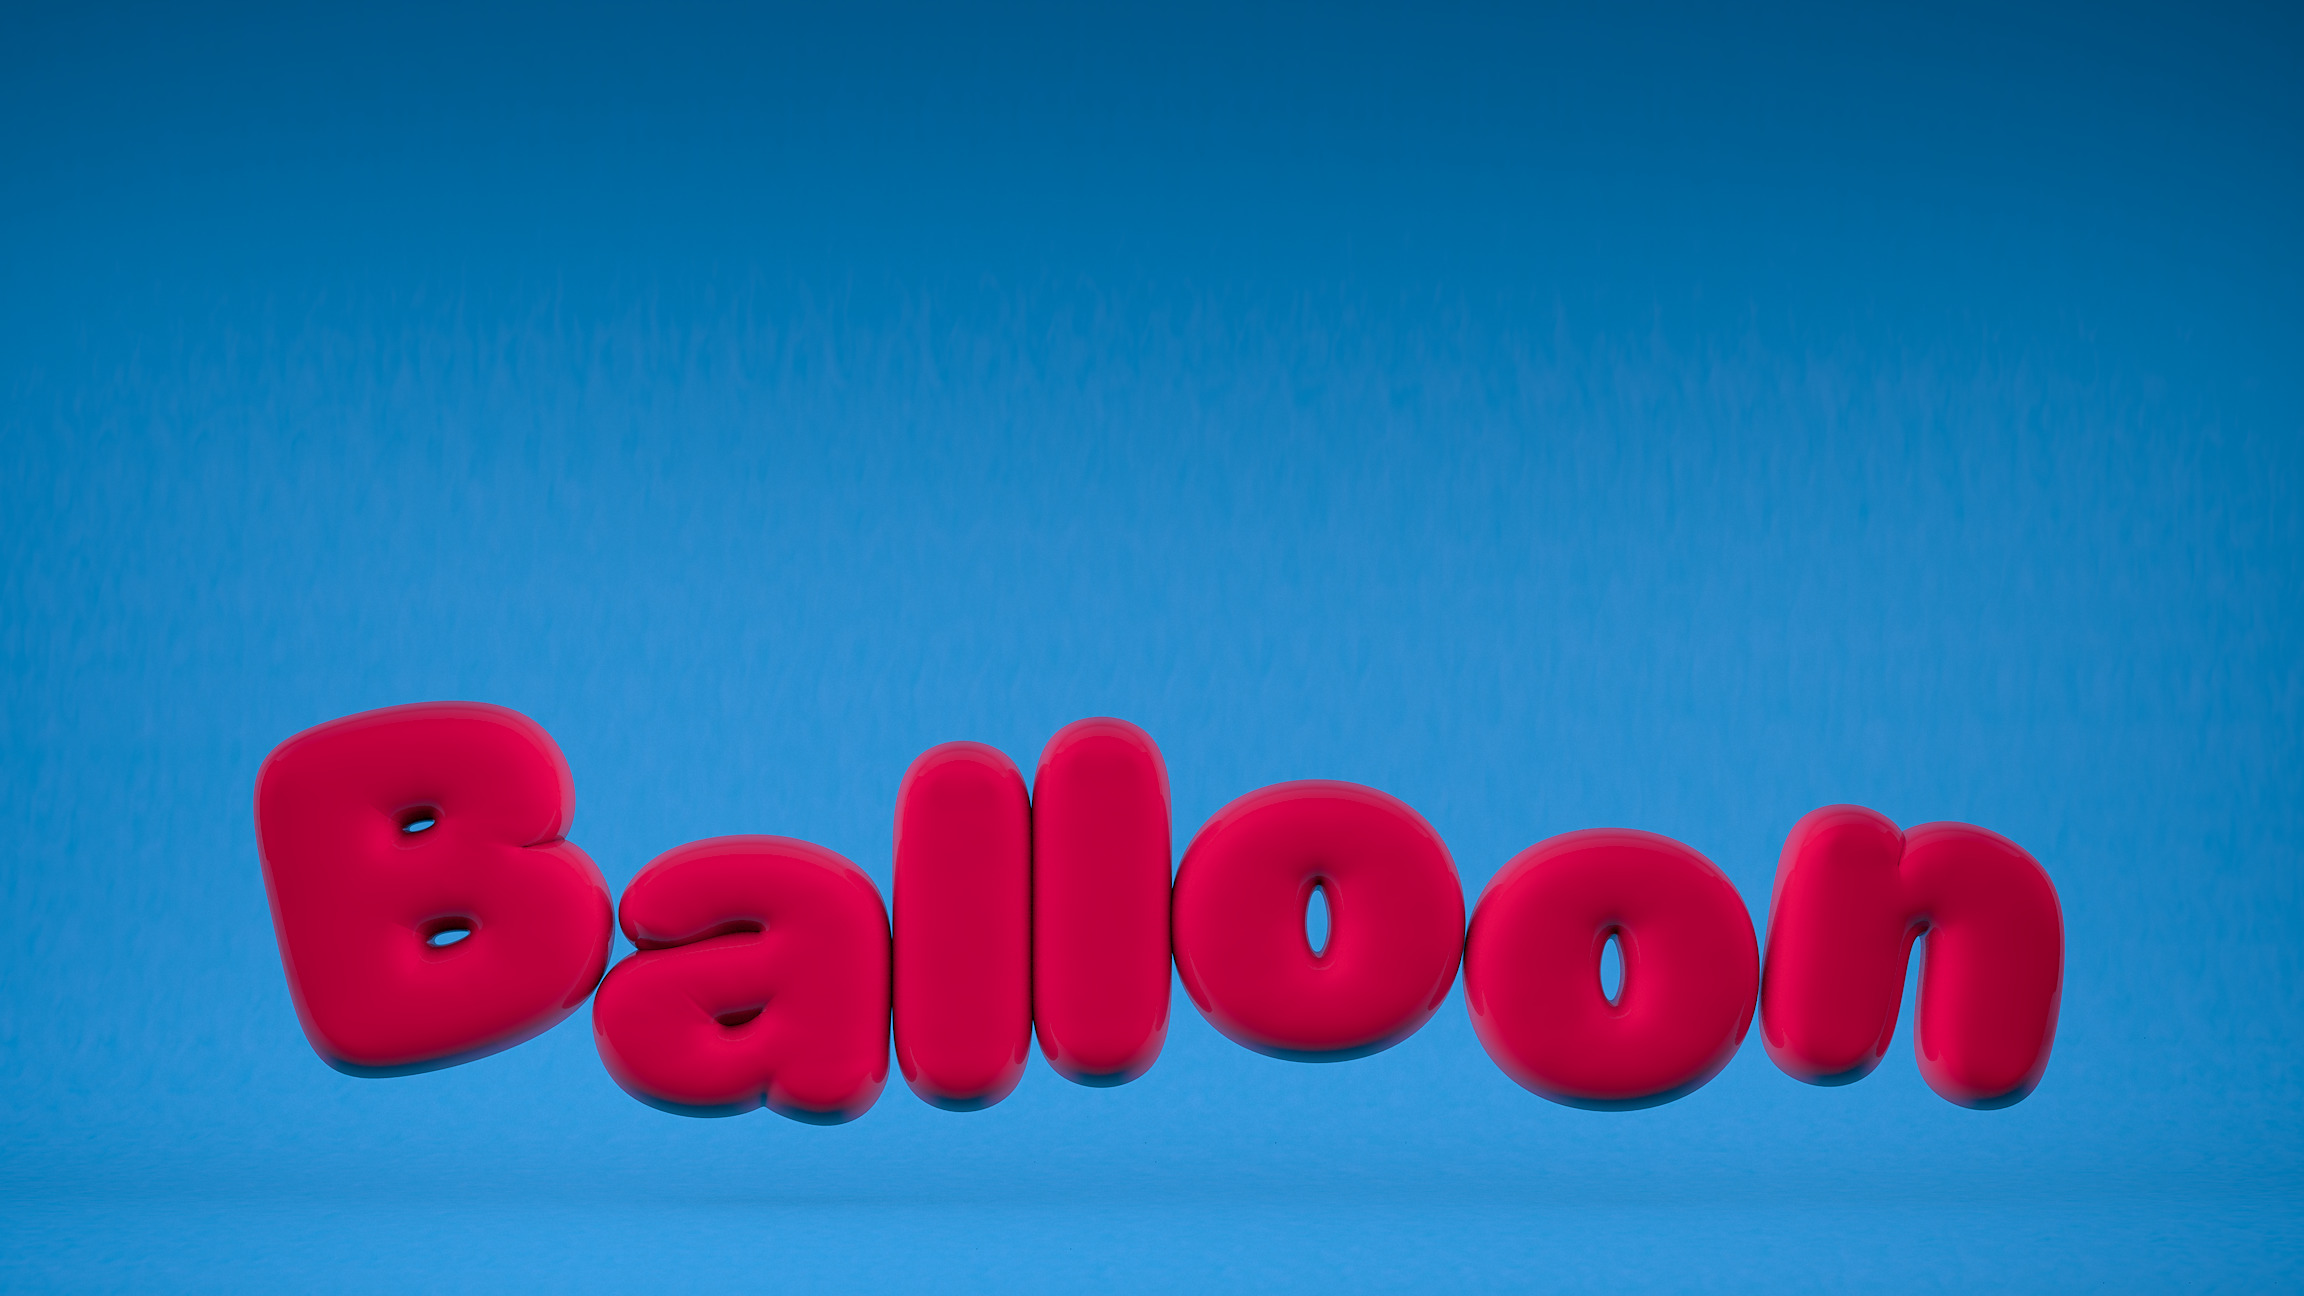 balloons, Balloon, Blue Clothing, Pink, 3D, Cinema 4D, Adobe Photoshop, Candy D, Sweets, Typography Wallpaper